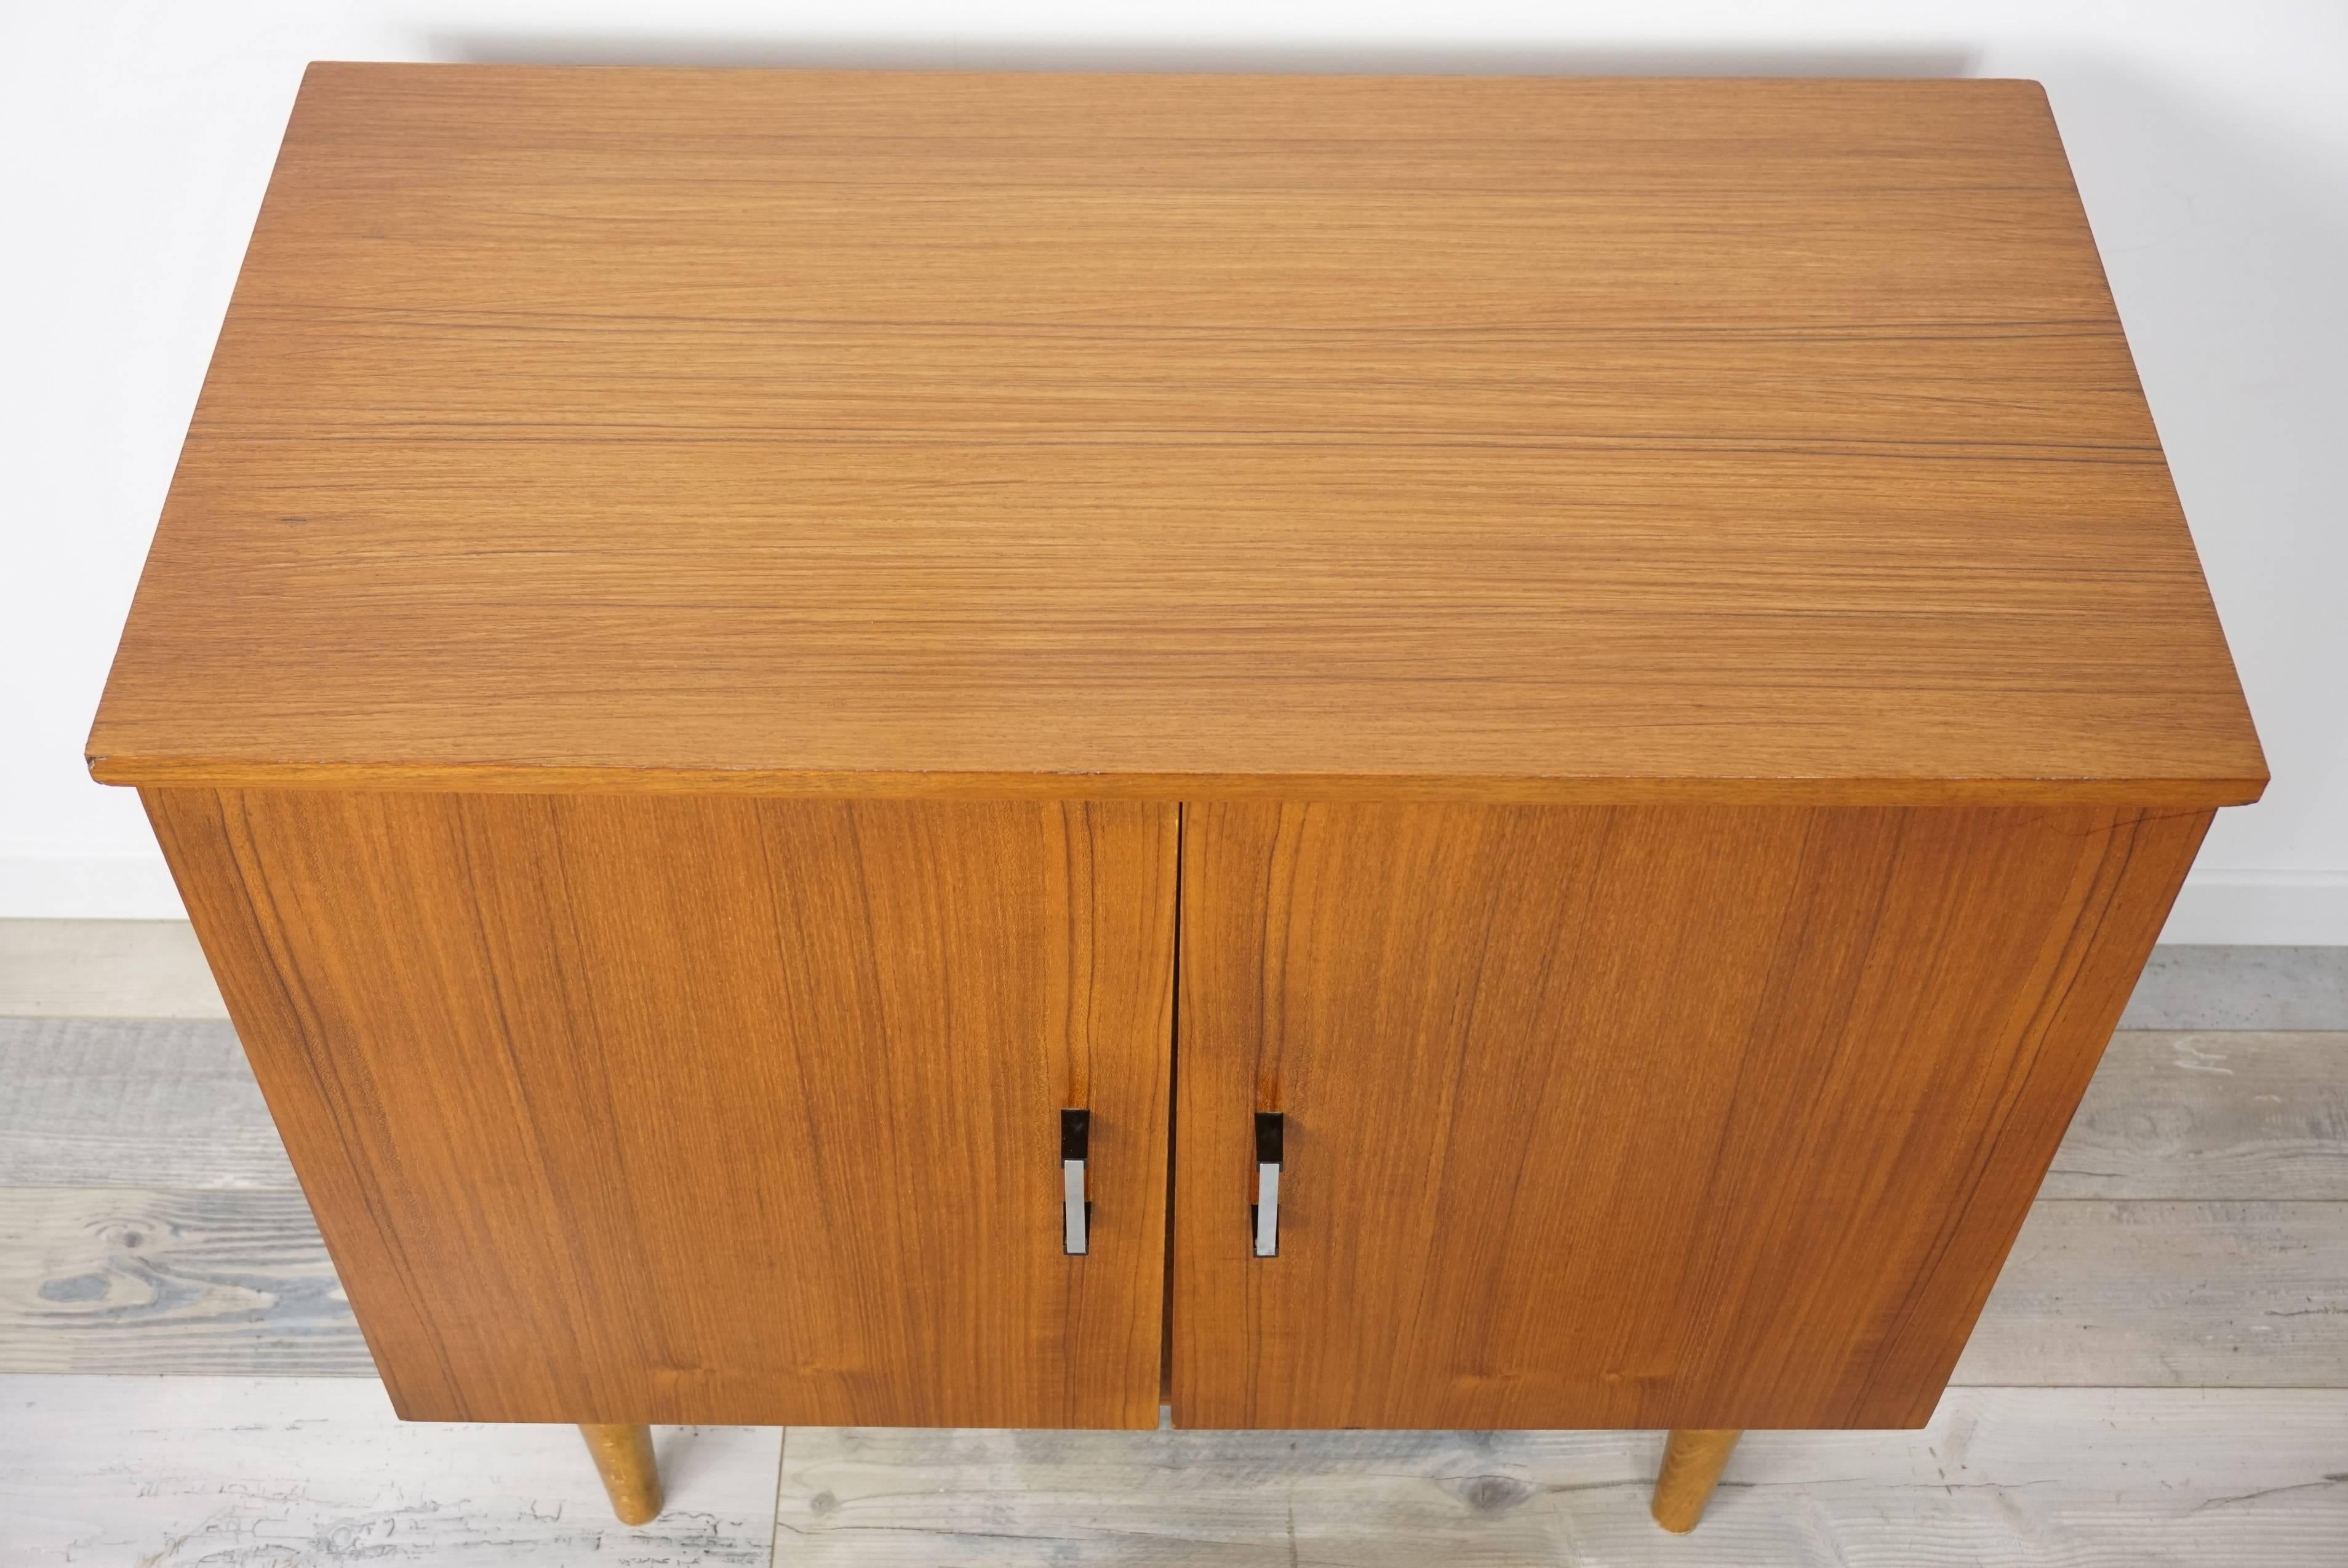 Metal Wooden Teak Storage Unit from the 1950s-1960s